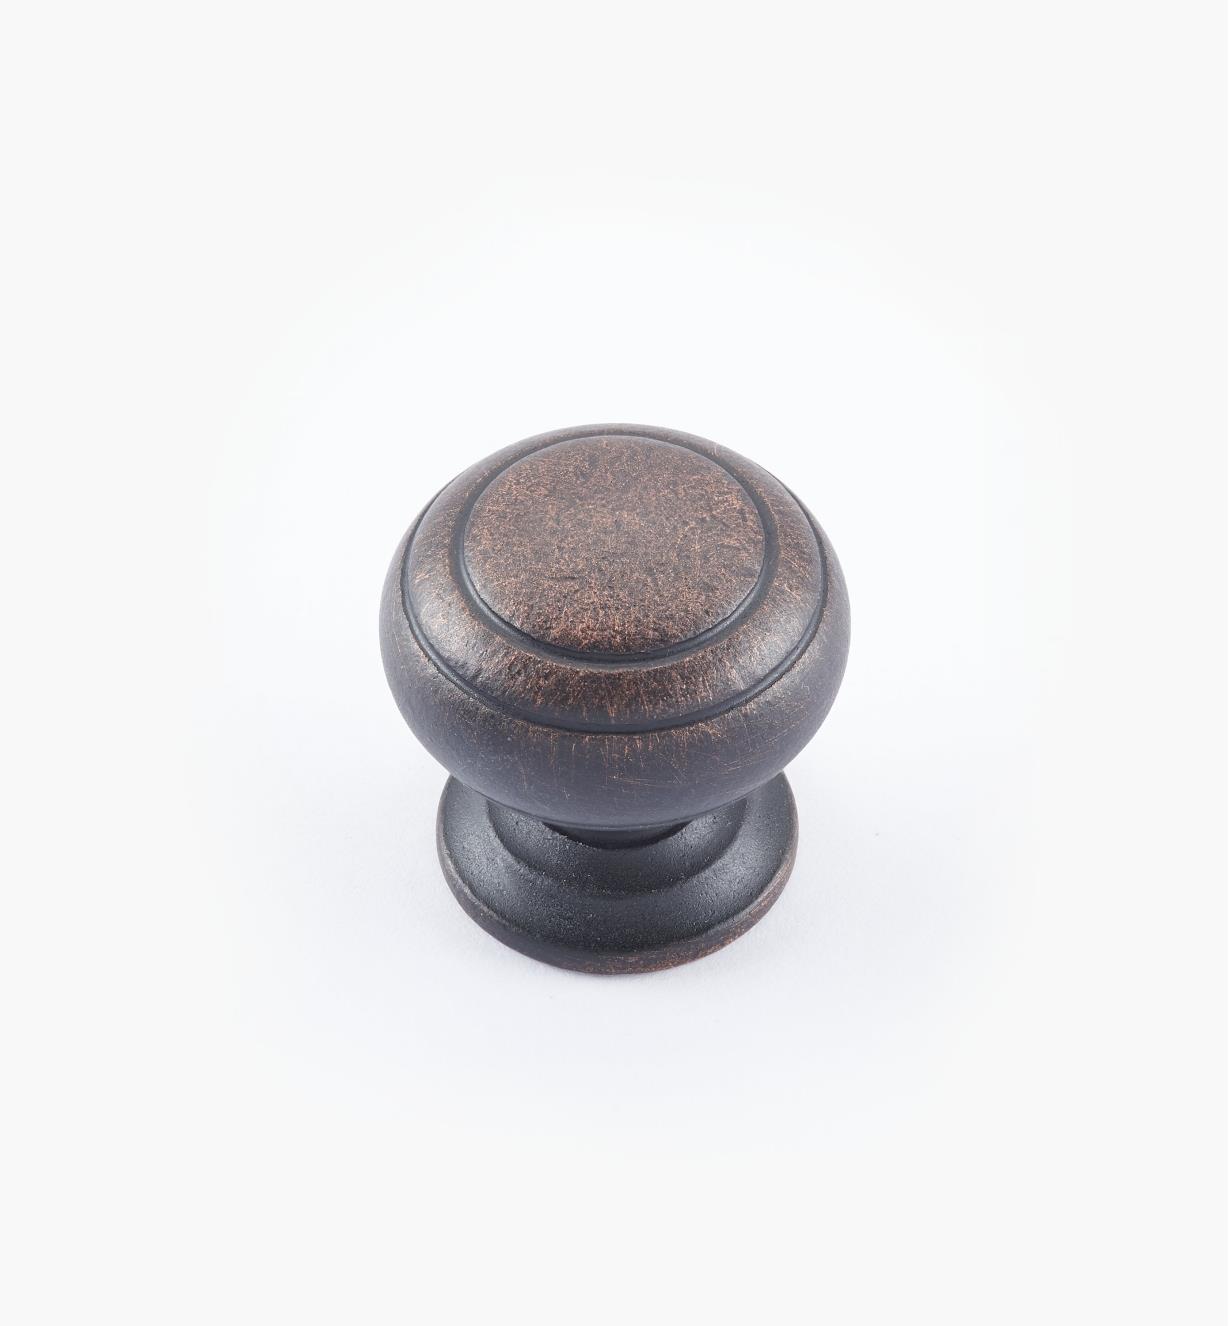 02W3265 - Weathered Bronze Suite - 1" x 1" Turned Brass Ring Knob